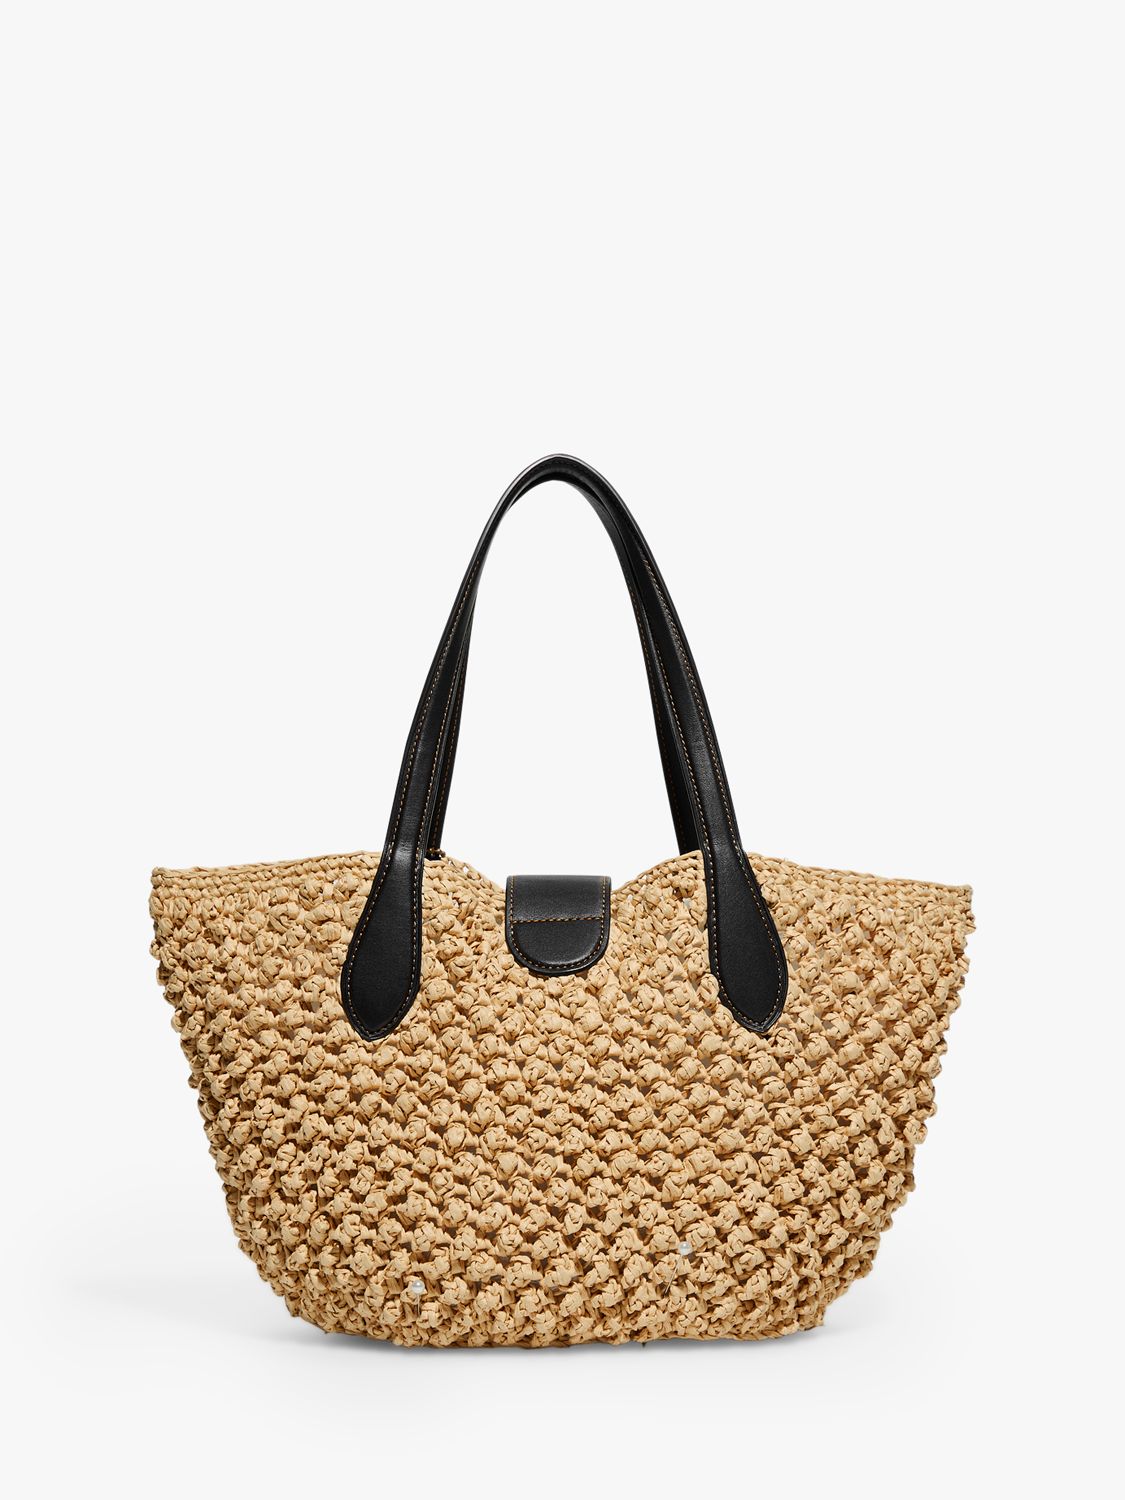 Coach Woven Straw Tote Bag, Black/Neutral at John Lewis & Partners